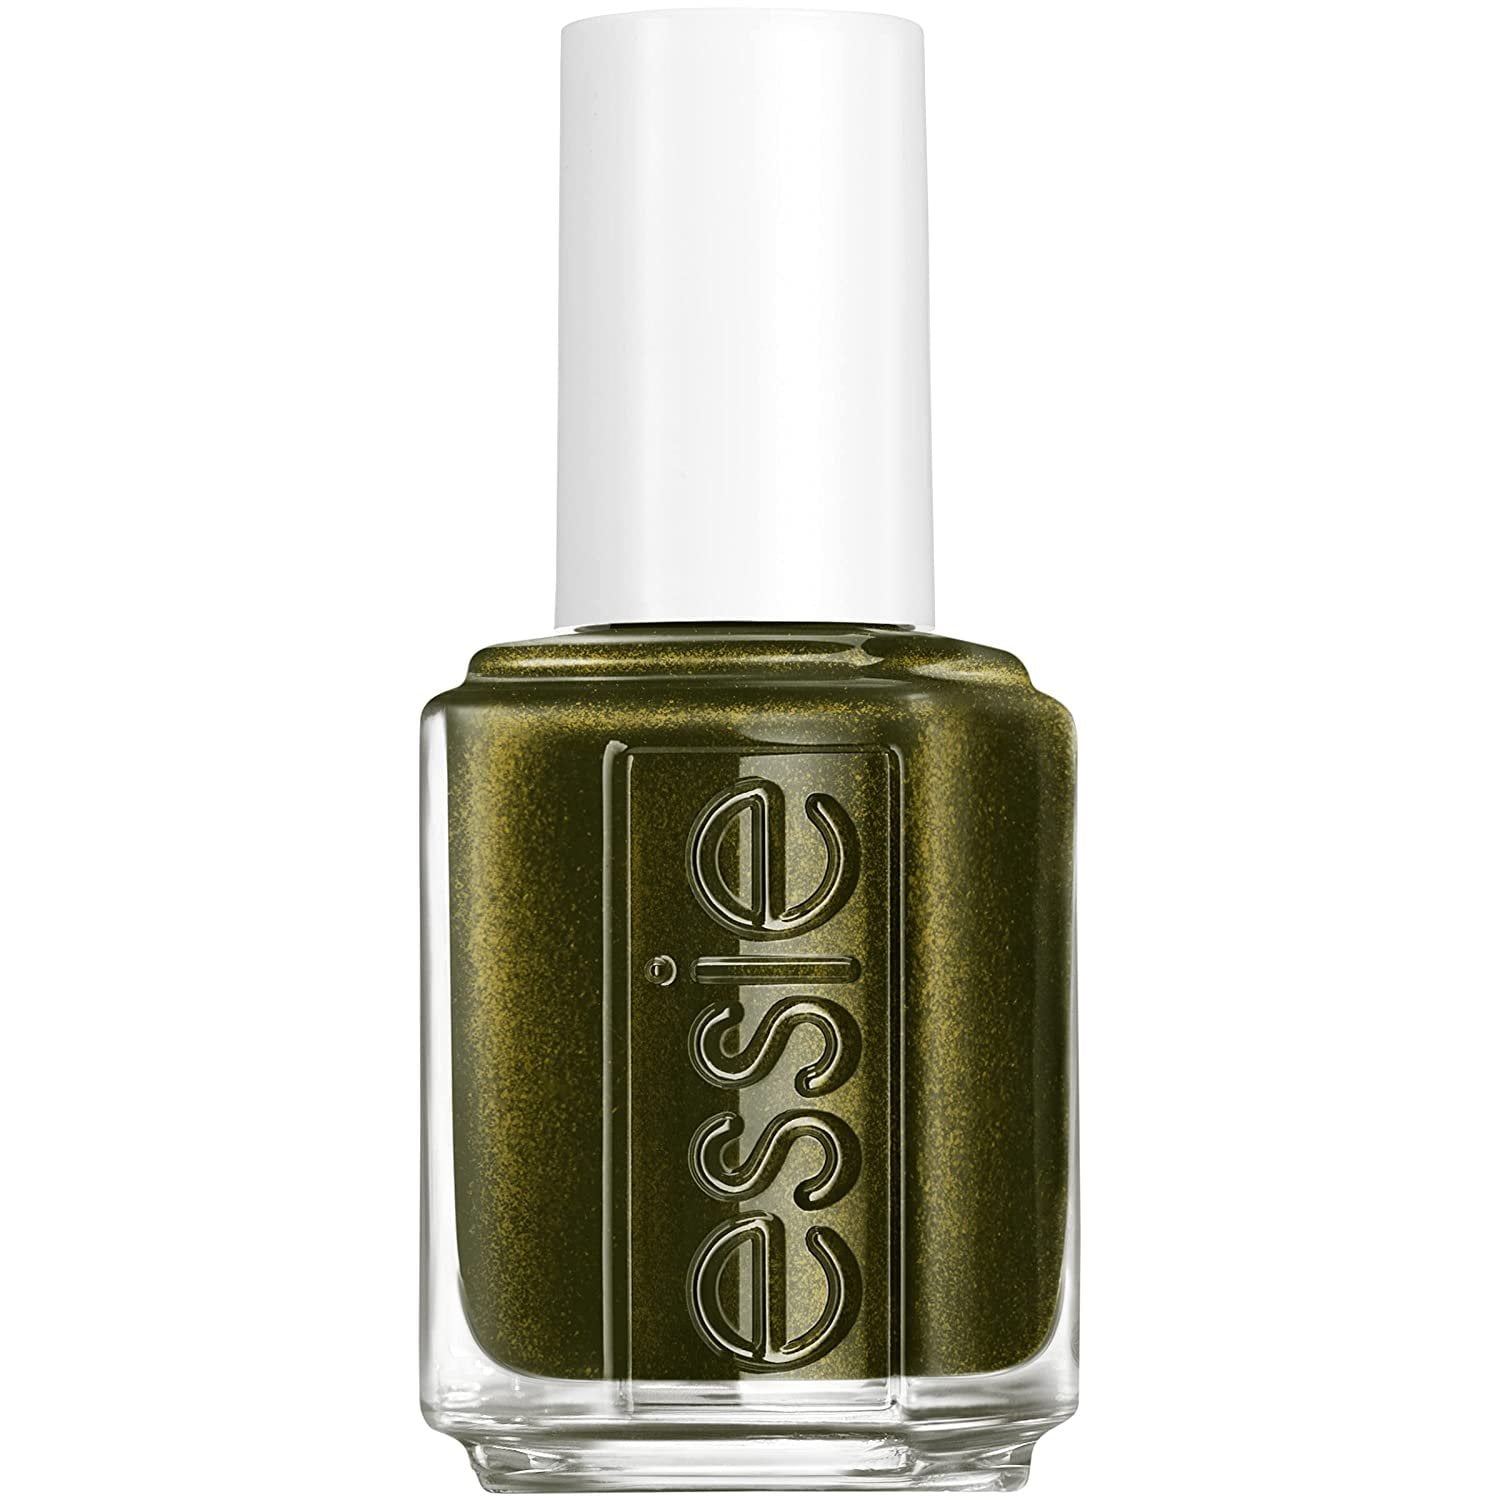 porselein Harde wind Republikeinse partij Essie essie nail polish, limited edition fall 2021 collection, warm onyx  green nail color with a shimmer finish, high voltage vinyl, 0.46 fl. oz. -  Walmart.com